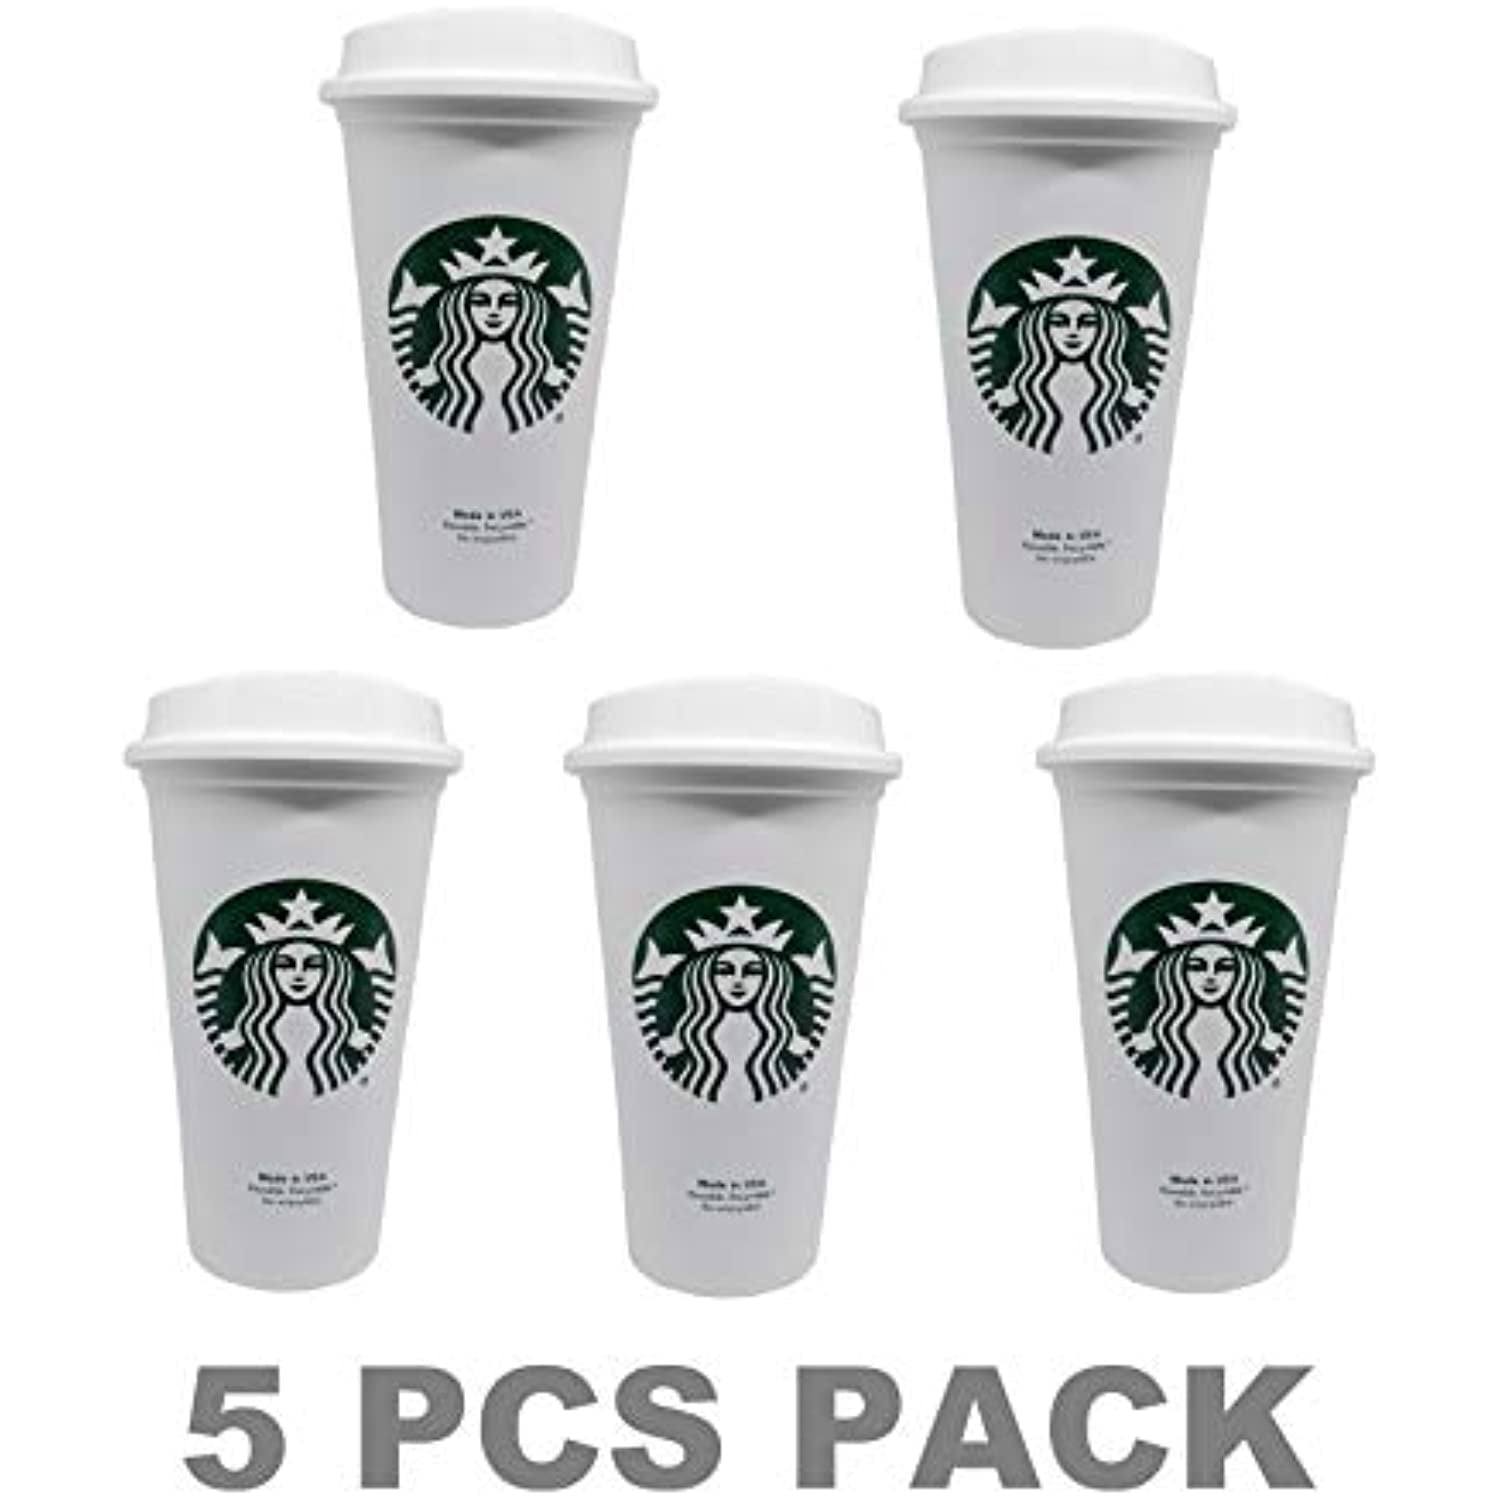 Plug for Starbucks Hot Cup, Flexible plug for the standard reusable Travel  To go Starbucks Venti grande coffee cup, doubles as belt strap